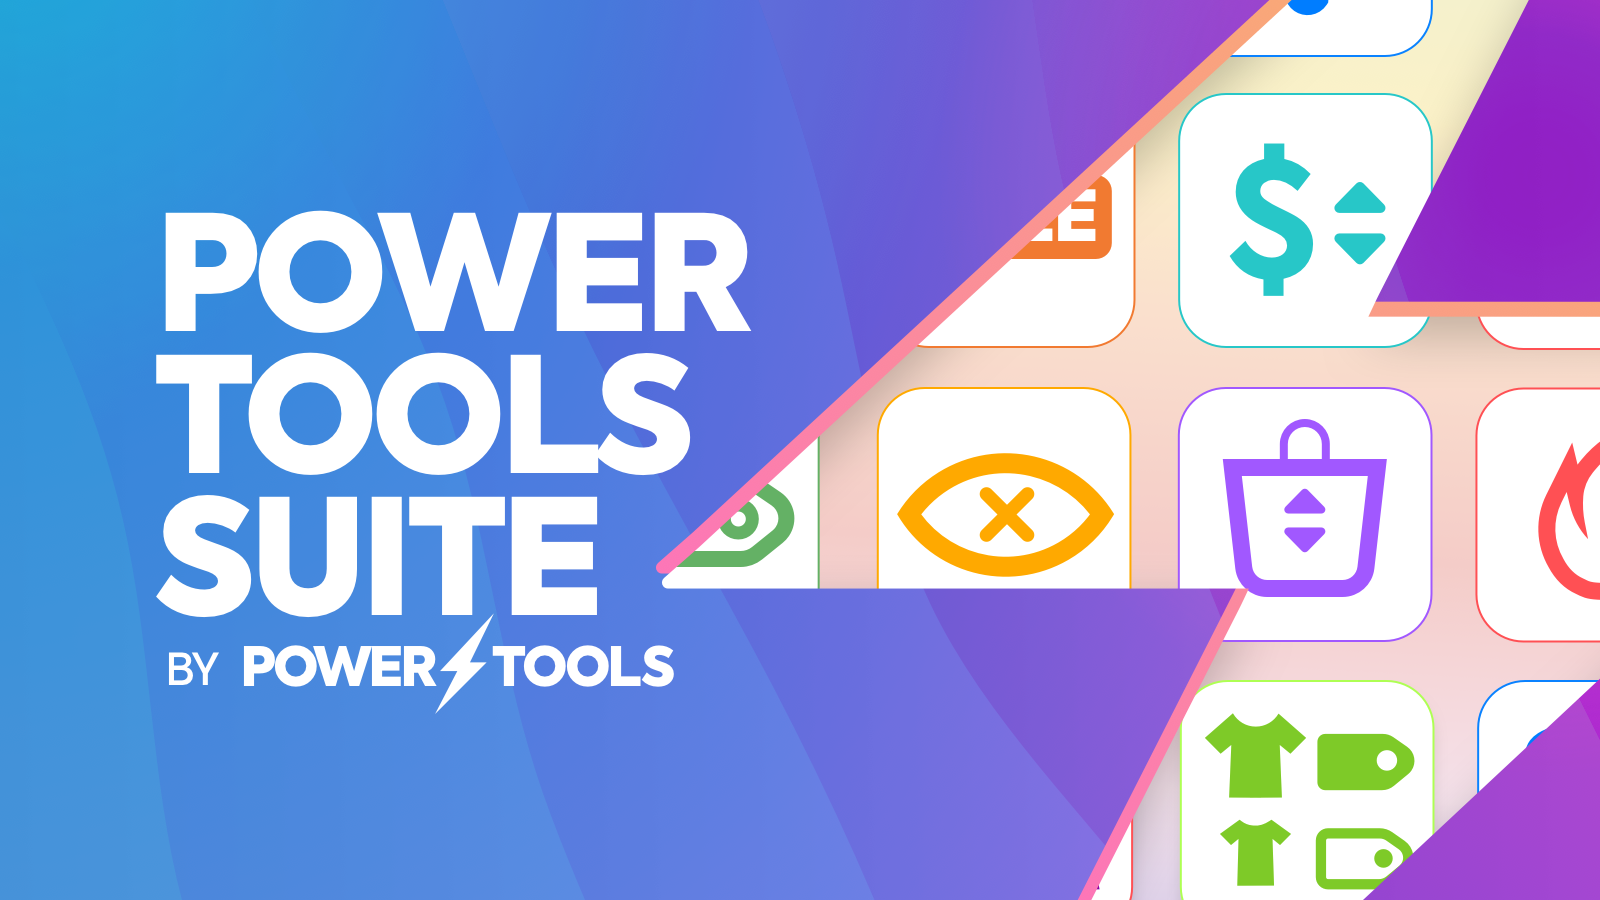 Boost your store with all the Power Tools Apps in one!
